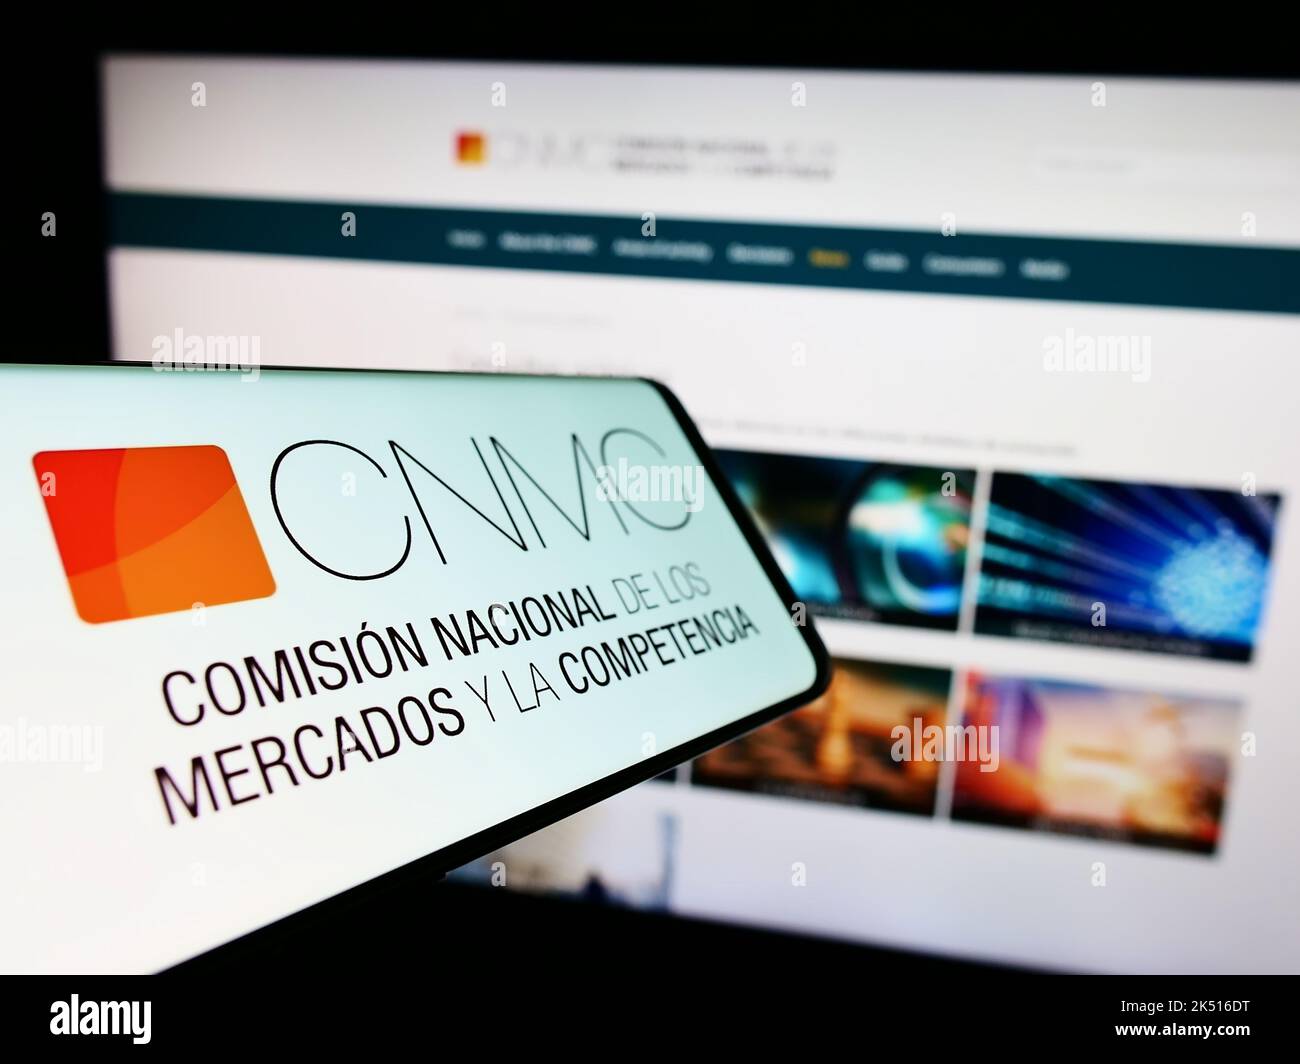 Mobile phone with logo of Spanish competition regulator CNMC on screen in front of business website. Focus on center-left of phone display. Stock Photo